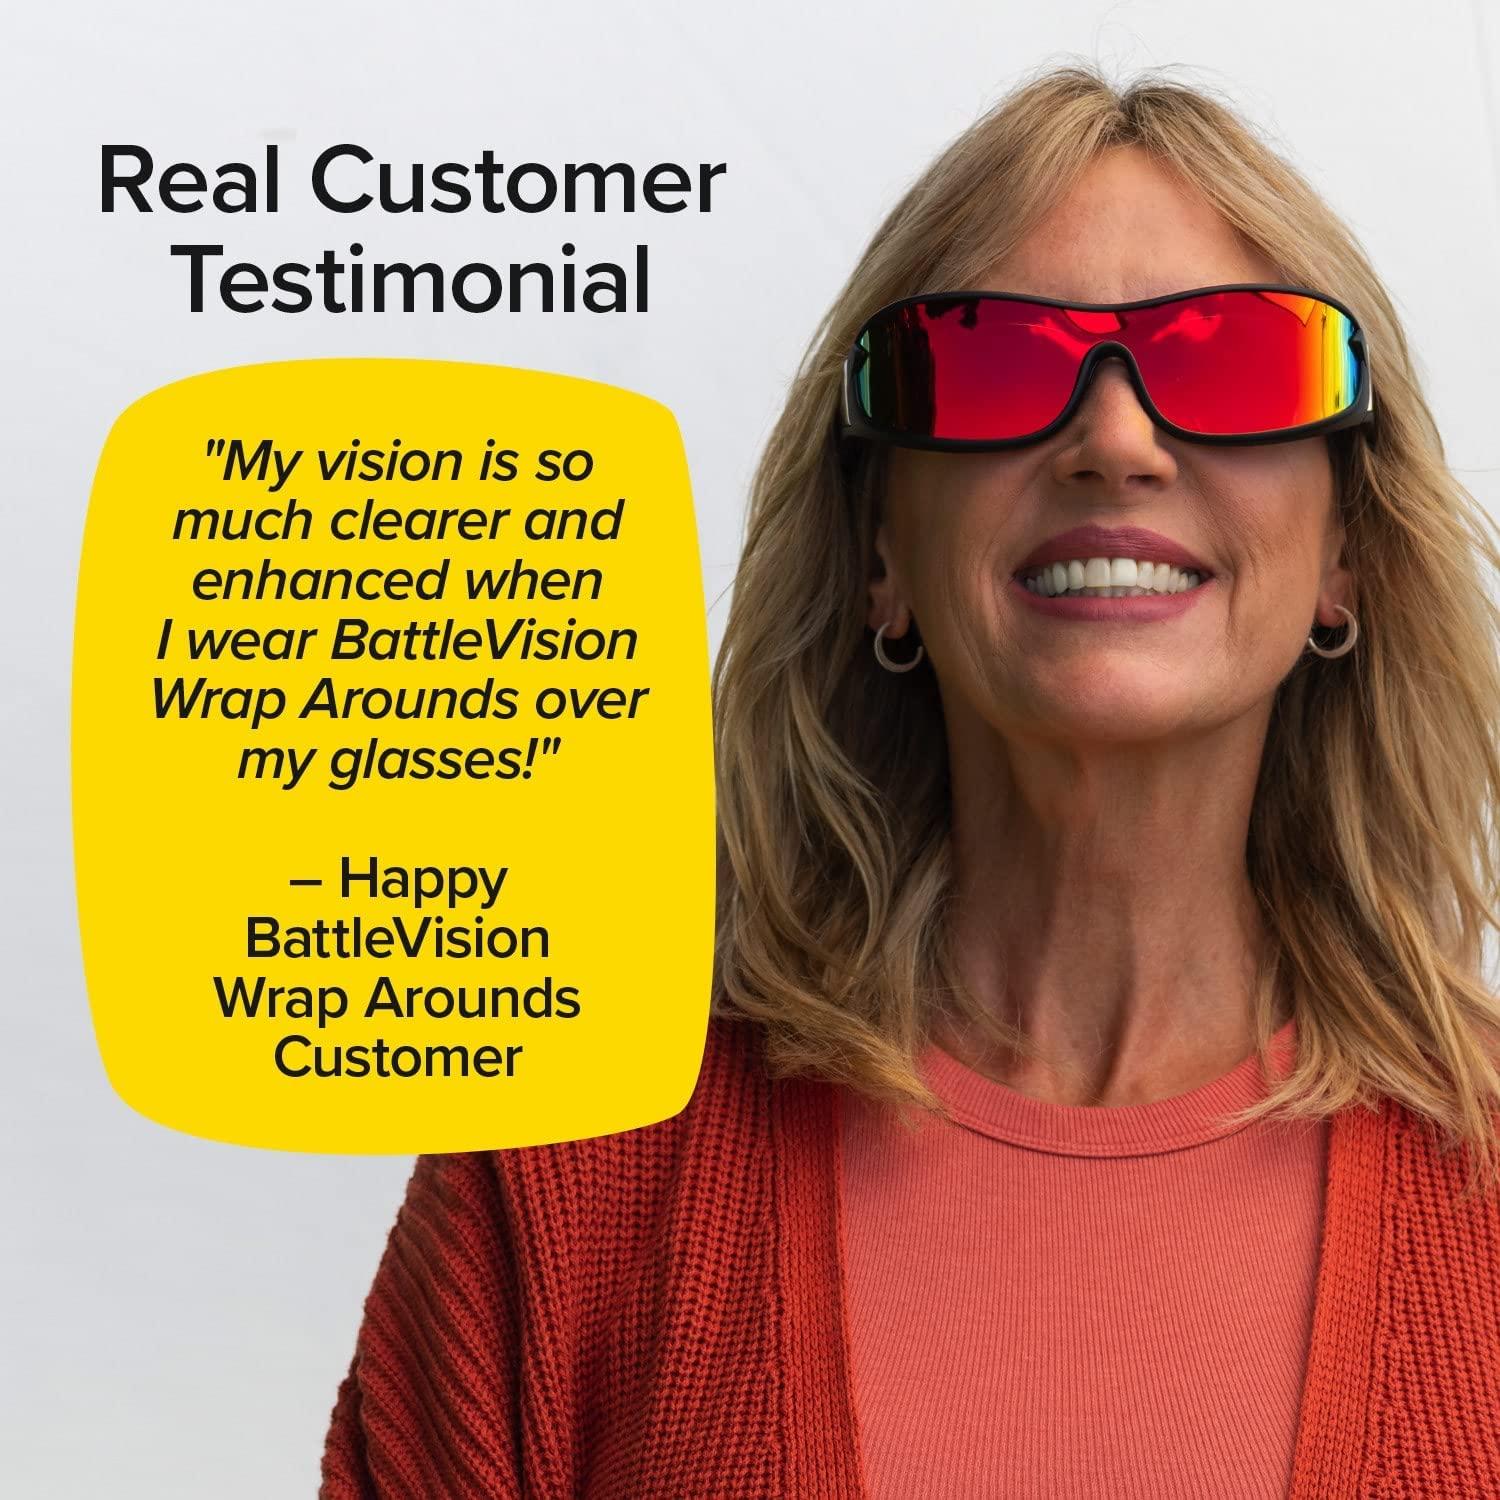 BattleVision Wrap Arounds HD Polarized Sunglasses, As Seen On TV, Fits Over  Your Prescription Eyeglasses and Reading, See Clearer, Anti-Glare, Protects  Your Eyes by Blocking Blue & UV Rays, Unisex